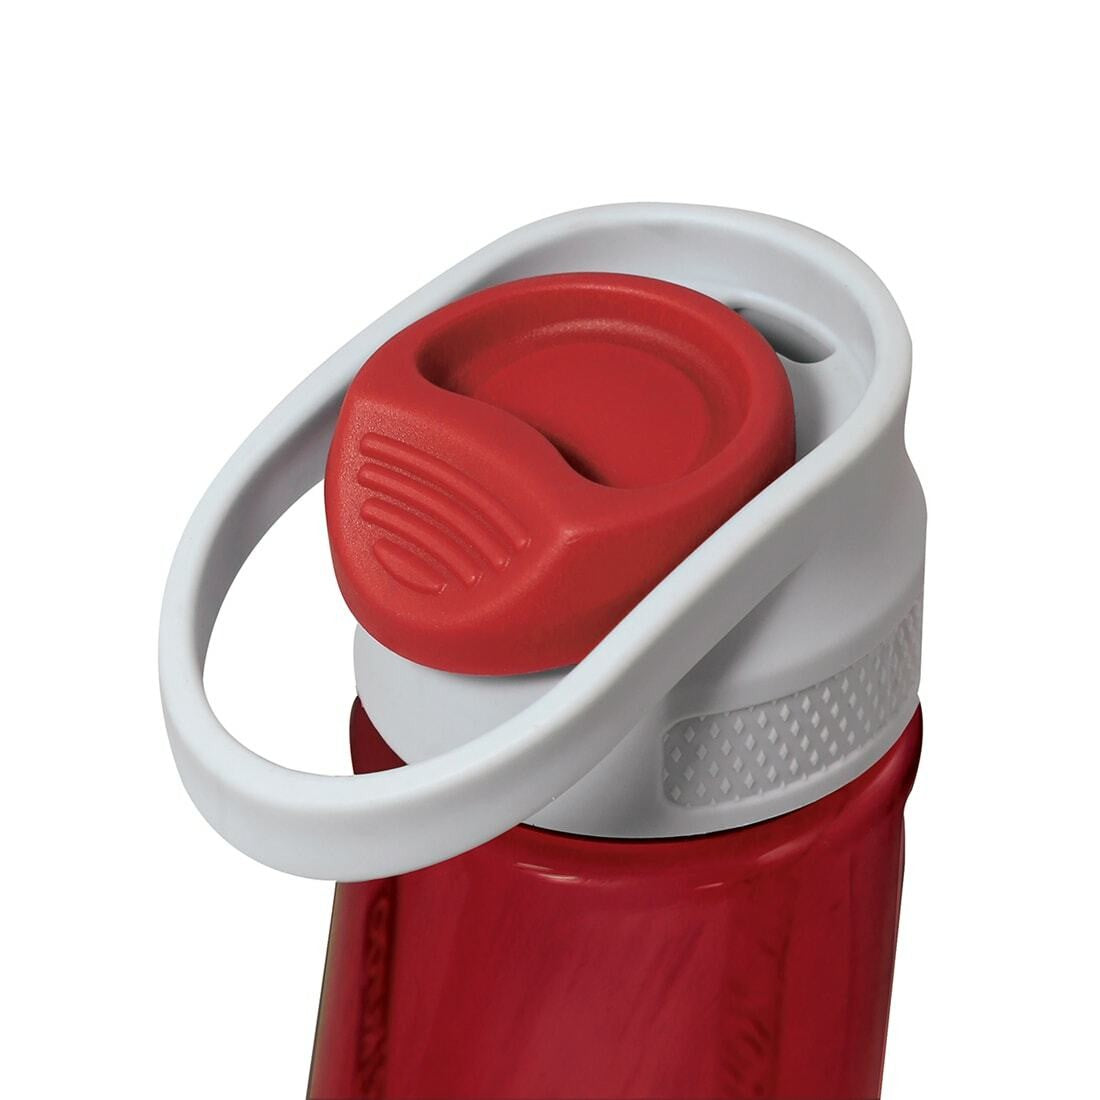 Close-up of a red water bottle cap with white handle.